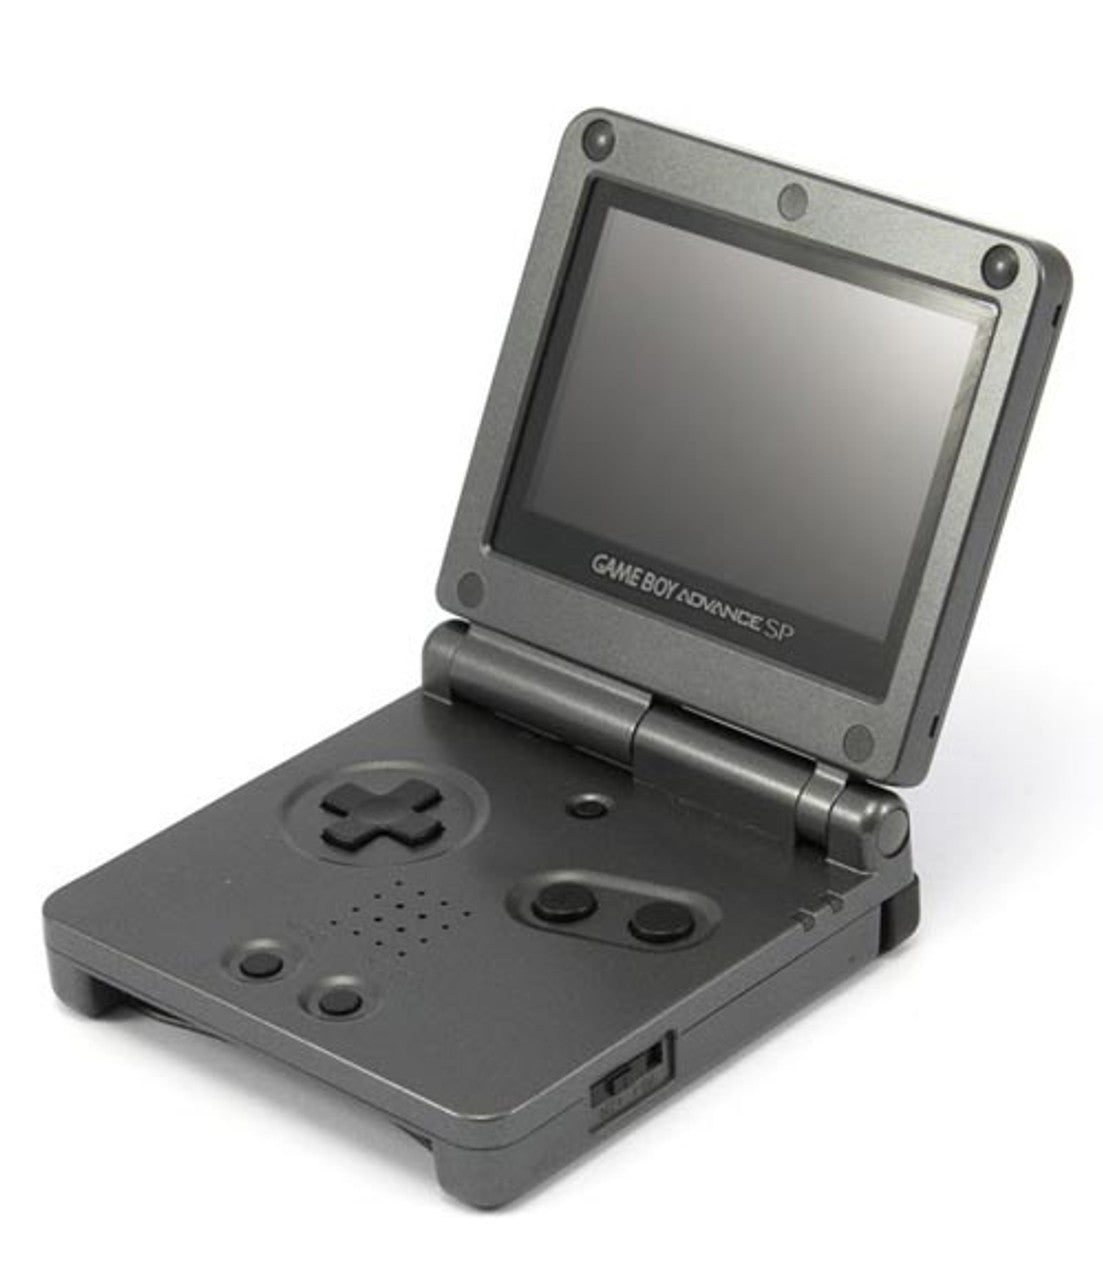 GBA - Graphite (AGS-101) | GBA CaveGamers